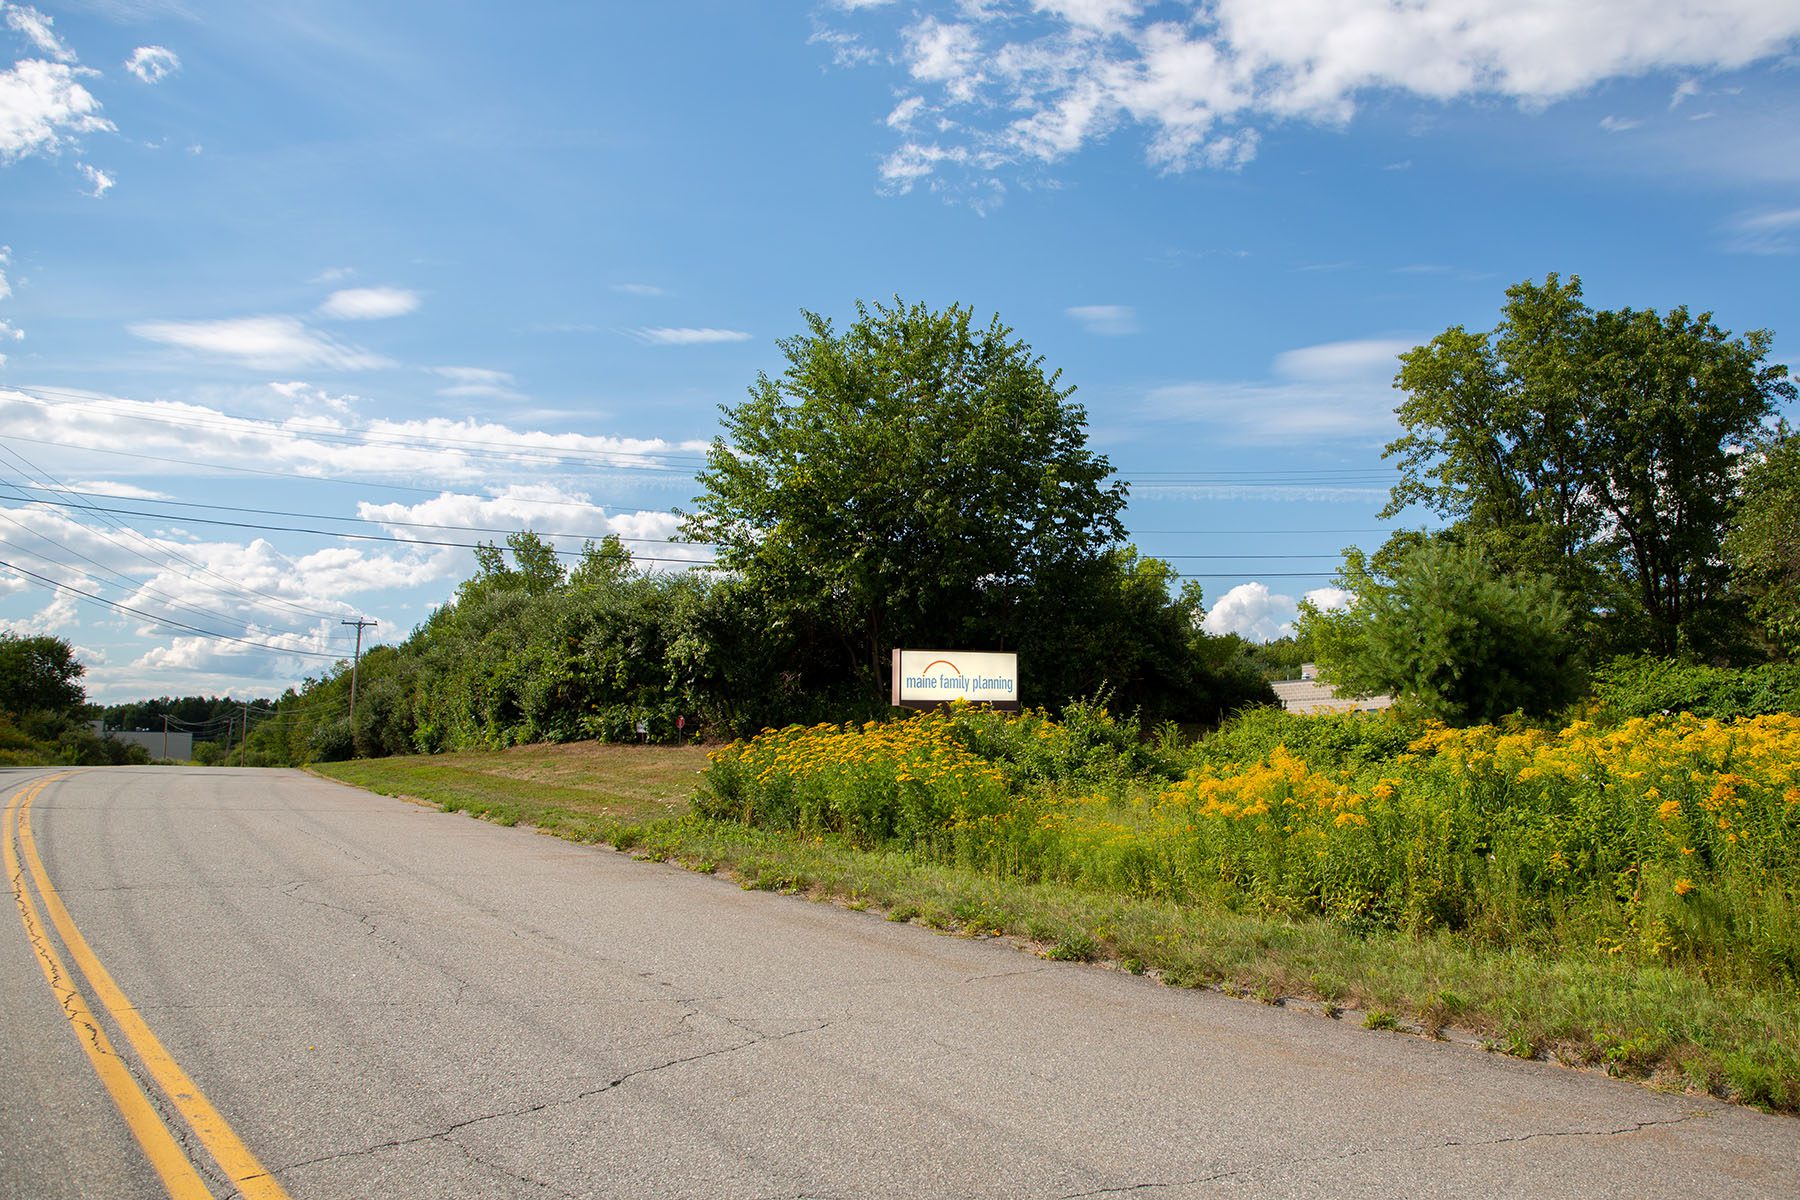 A sign for the Maine Family Clinic is seen on the side of a road.